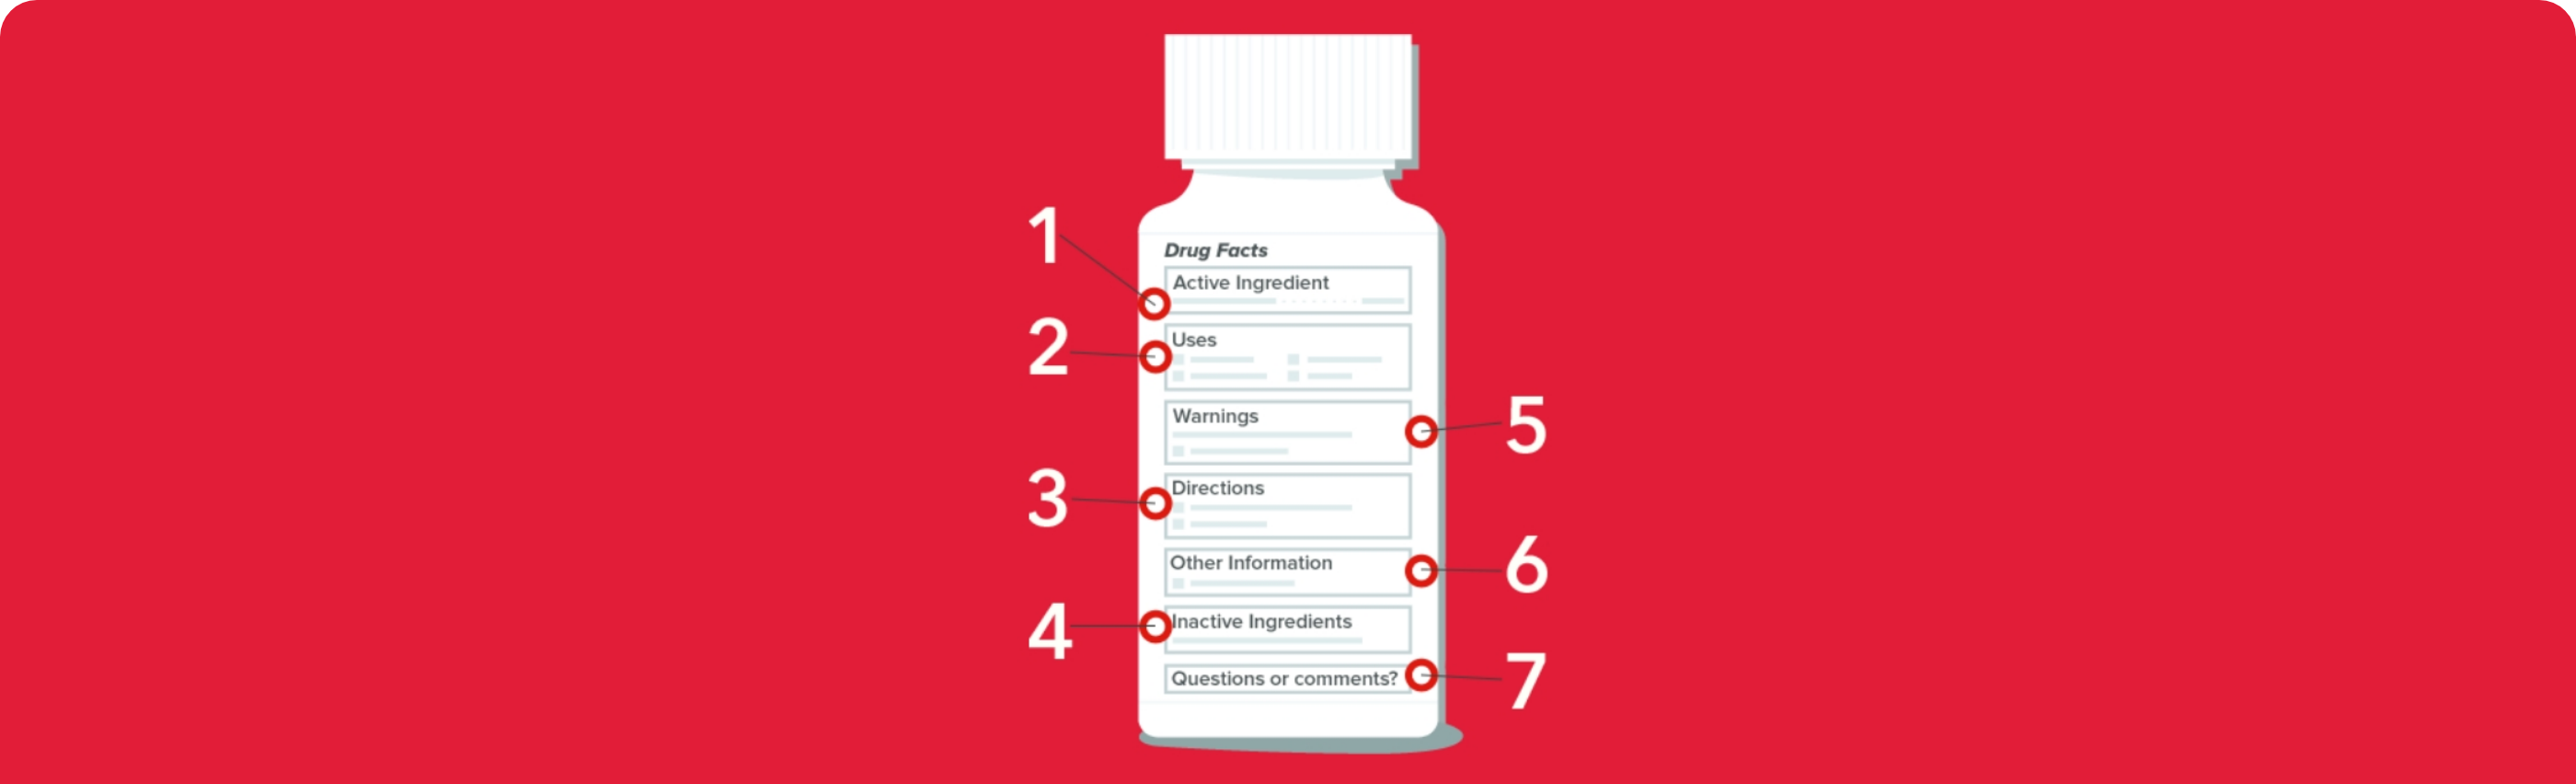 7 items to look at when reading a medicine label